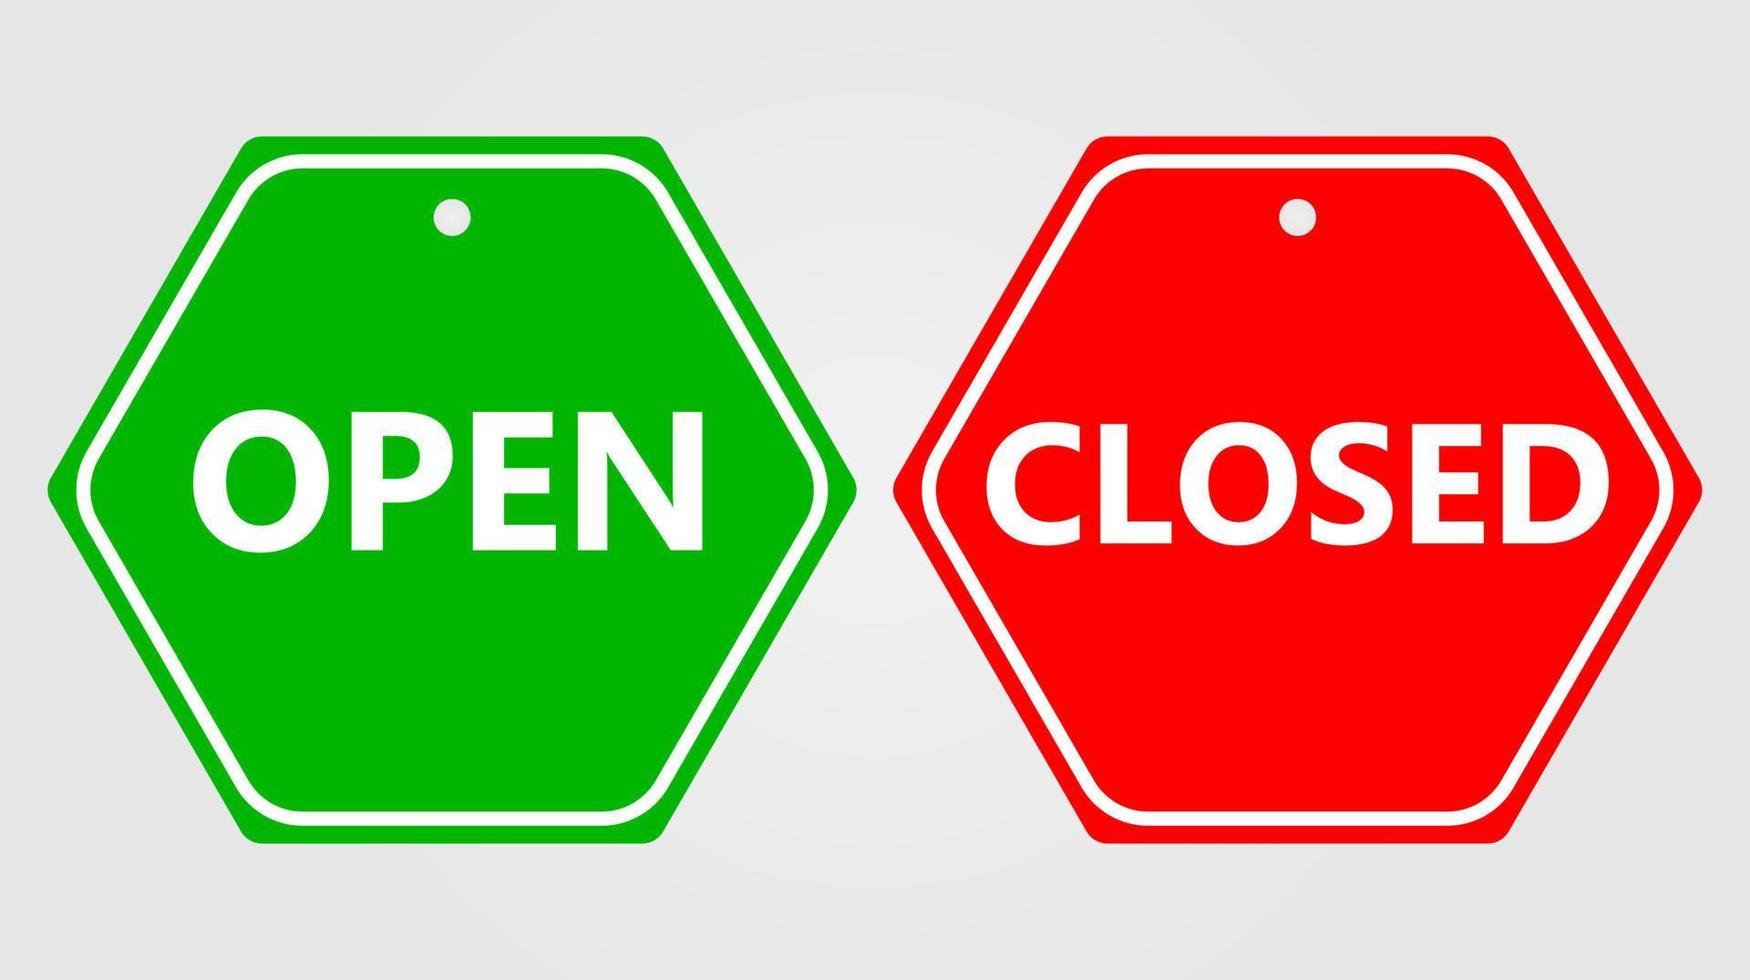 Open and closed signs. Vector illustration.